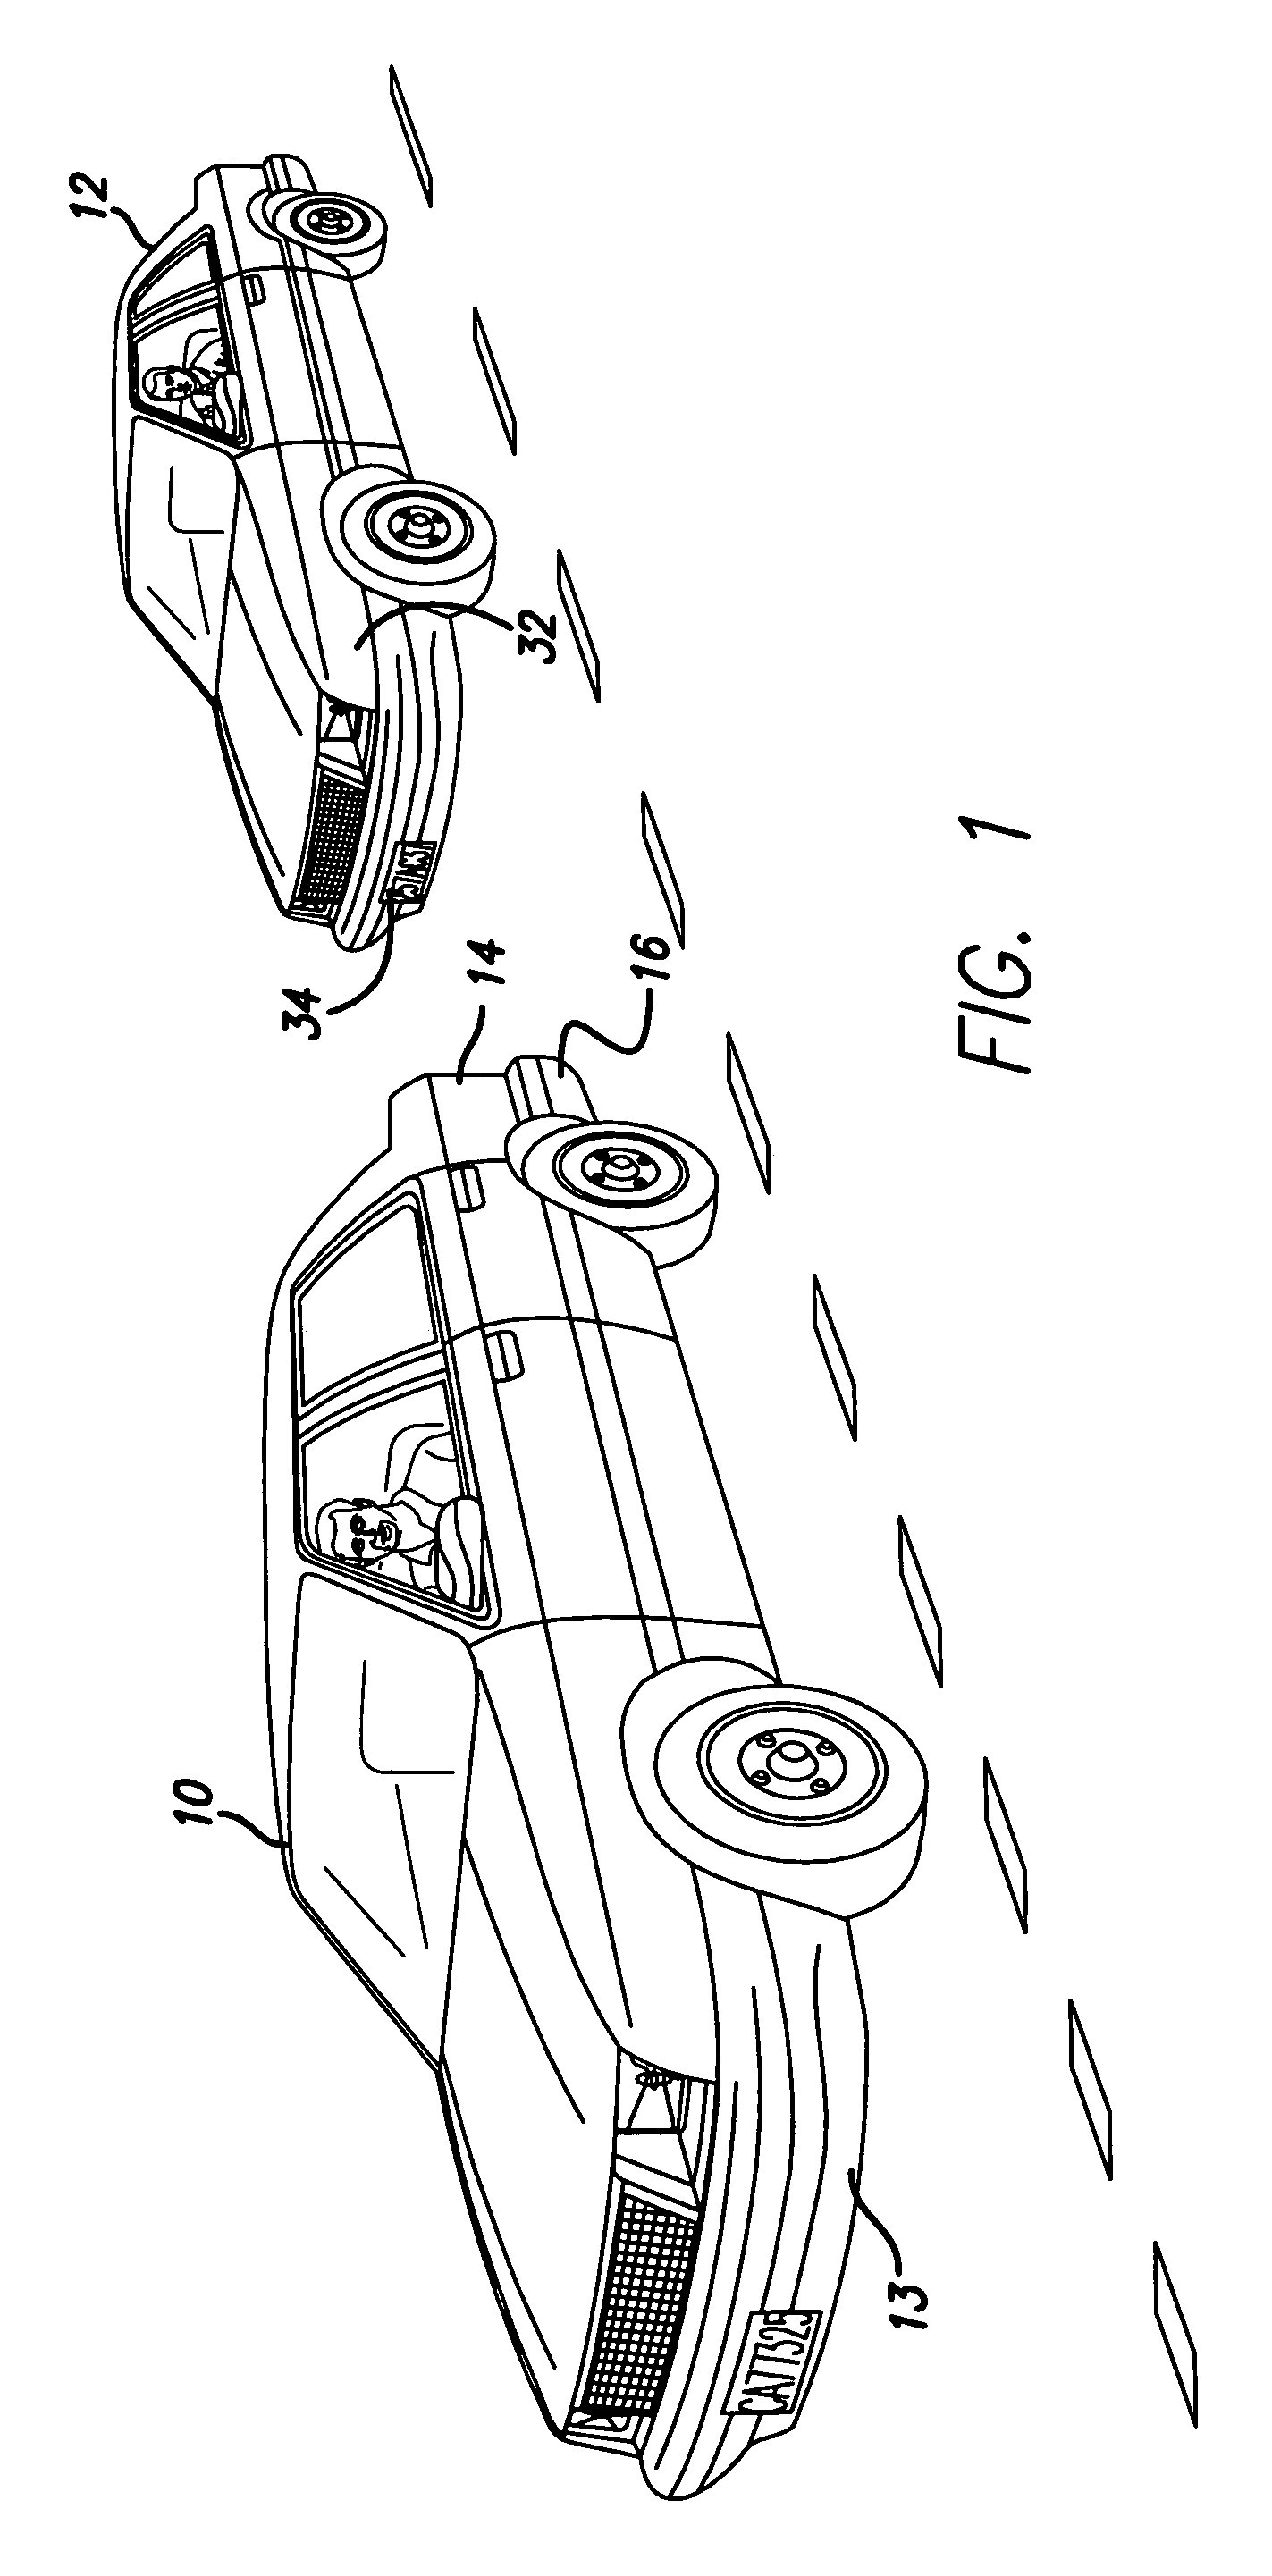 Vehicle tailgating detection system